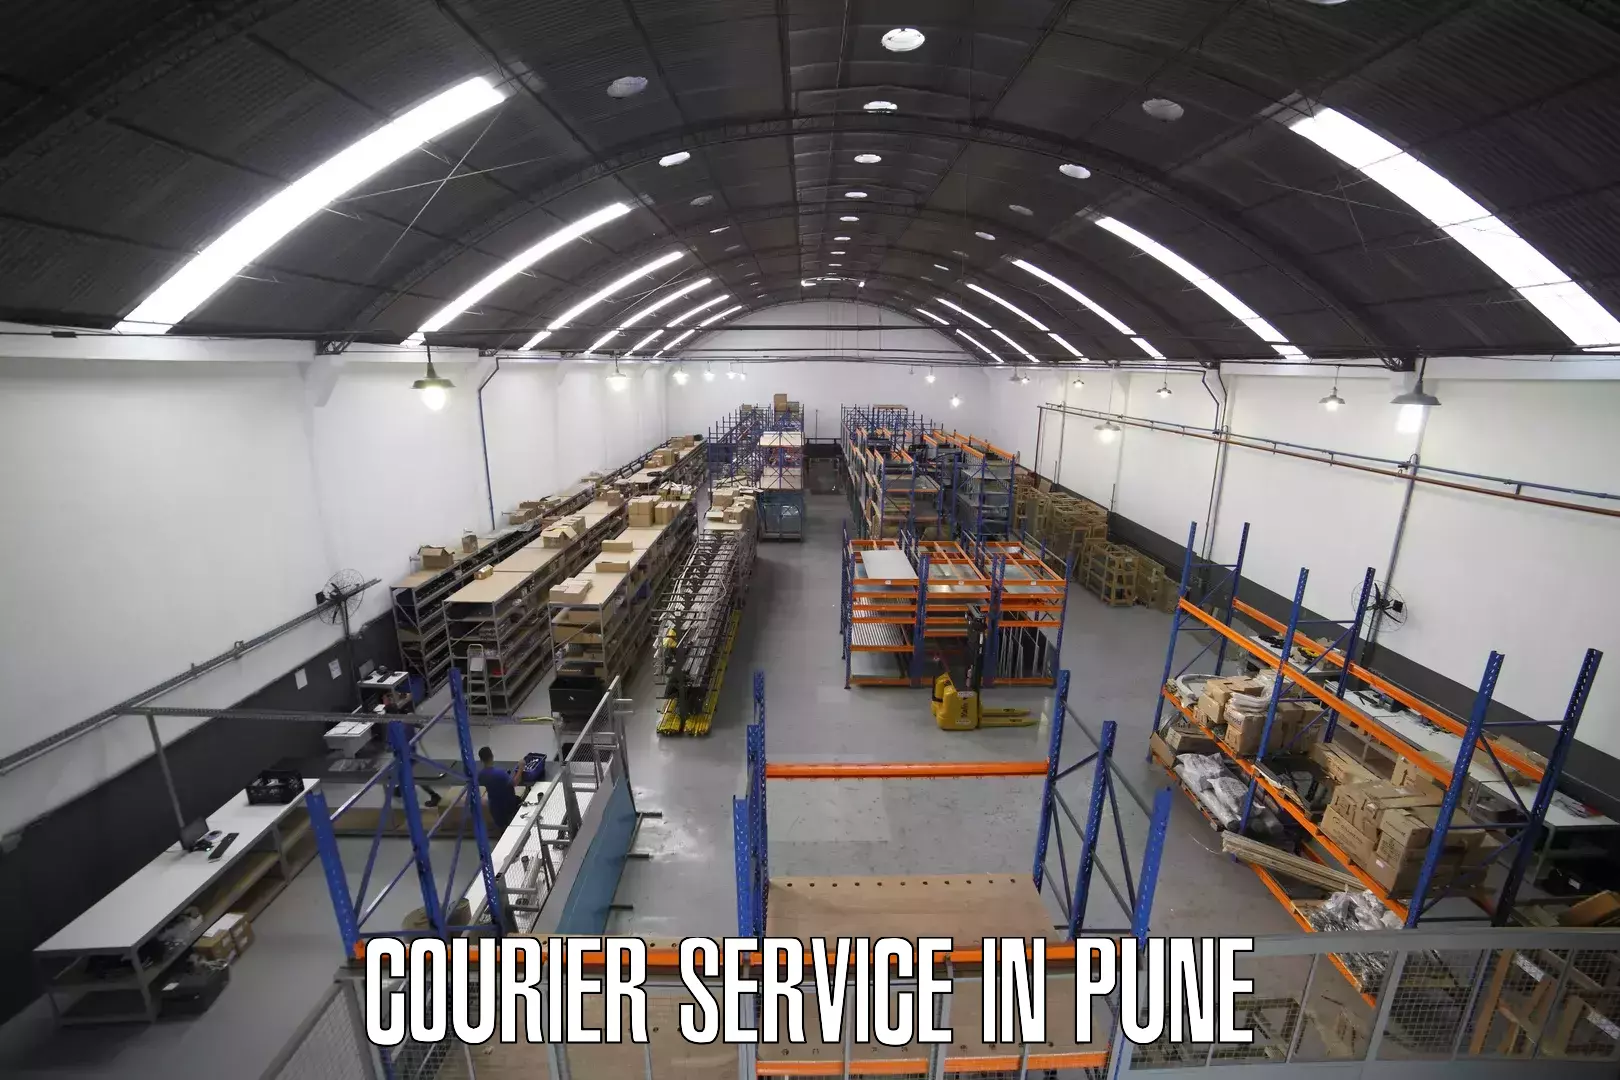 Speedy delivery service in Pune